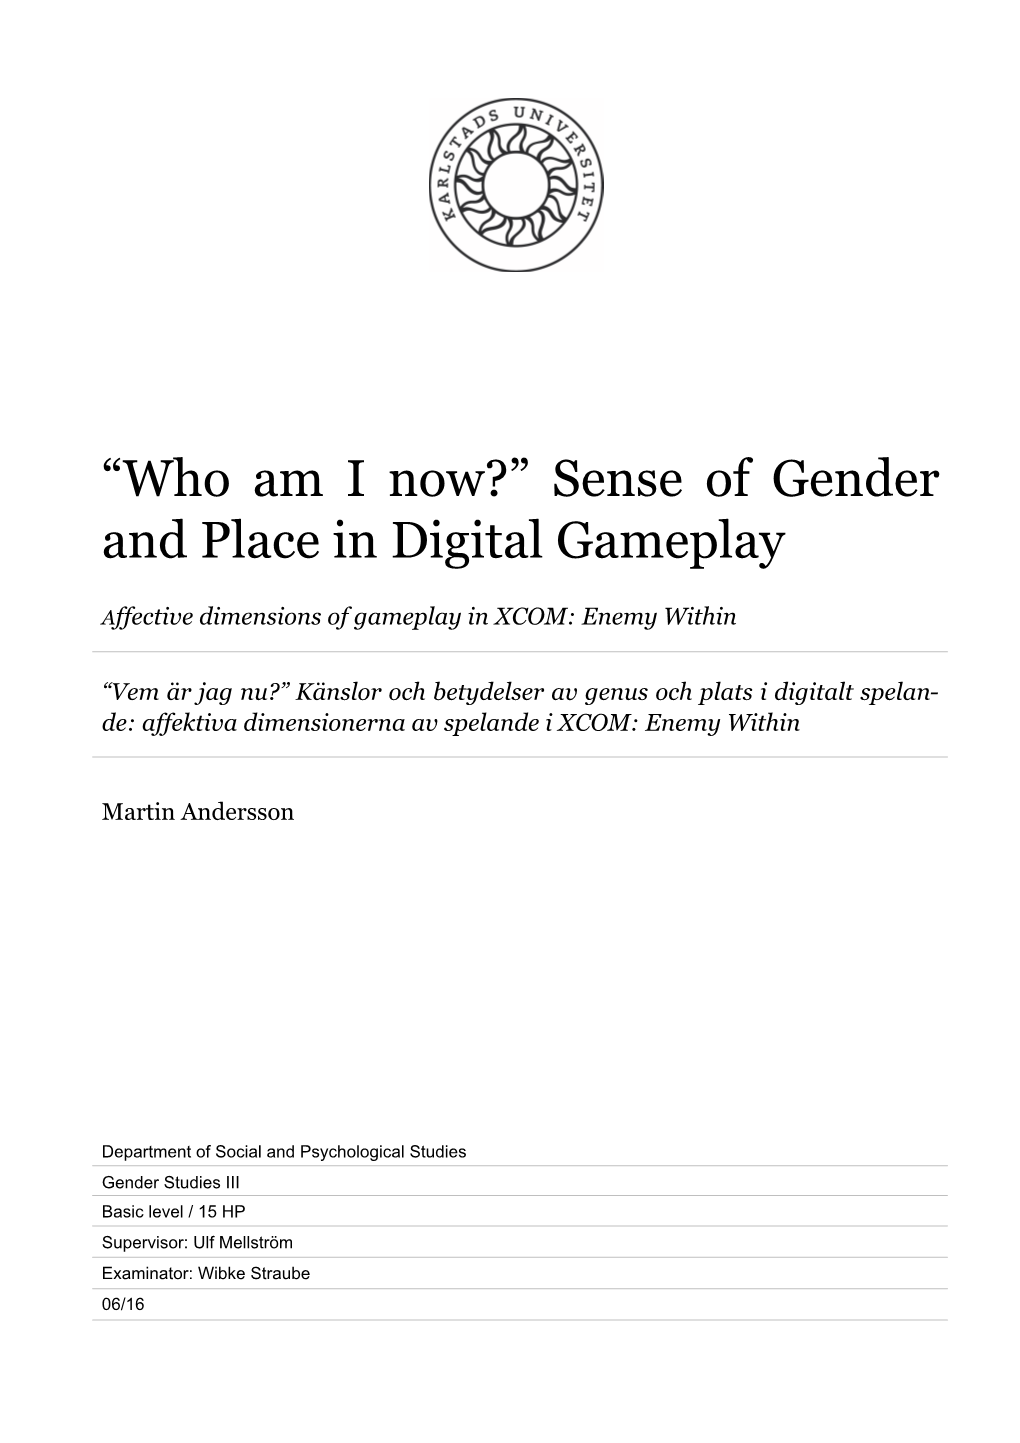 “Who Am I Now?” Sense of Gender and Place in Digital Gameplay